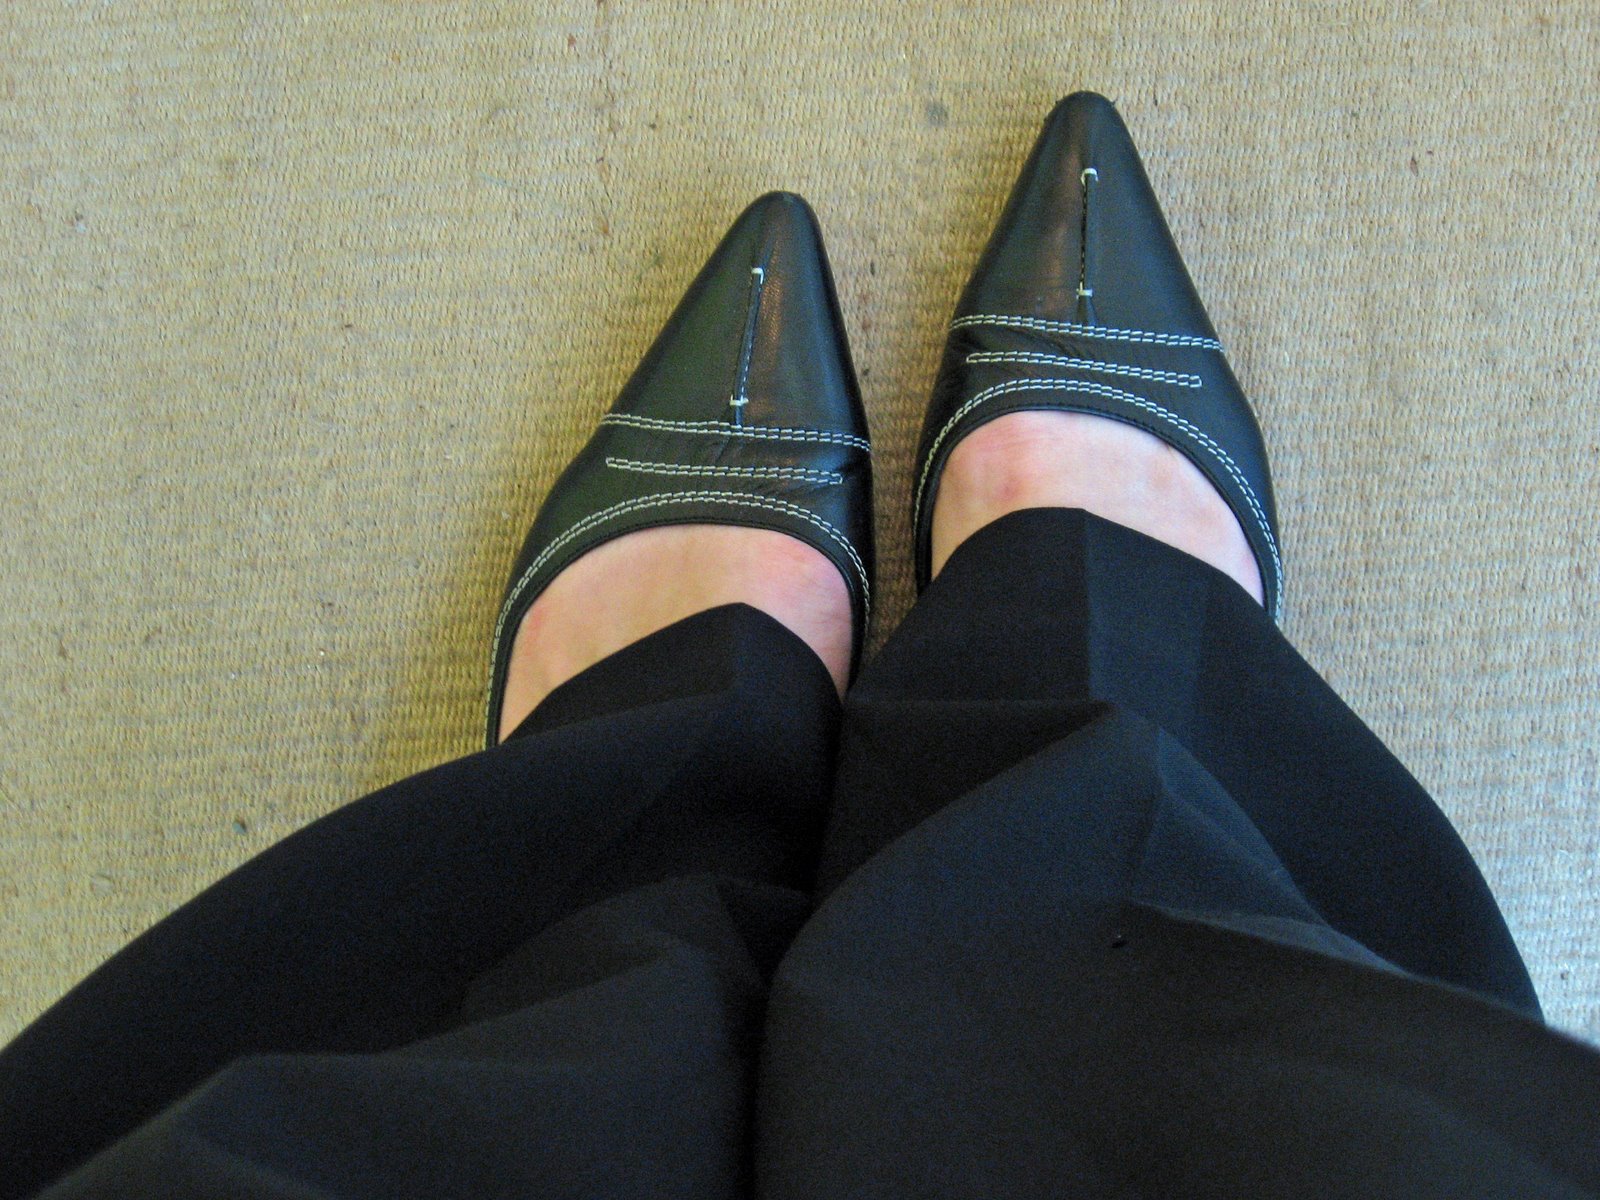 [Pointy+Shoes.jpg]